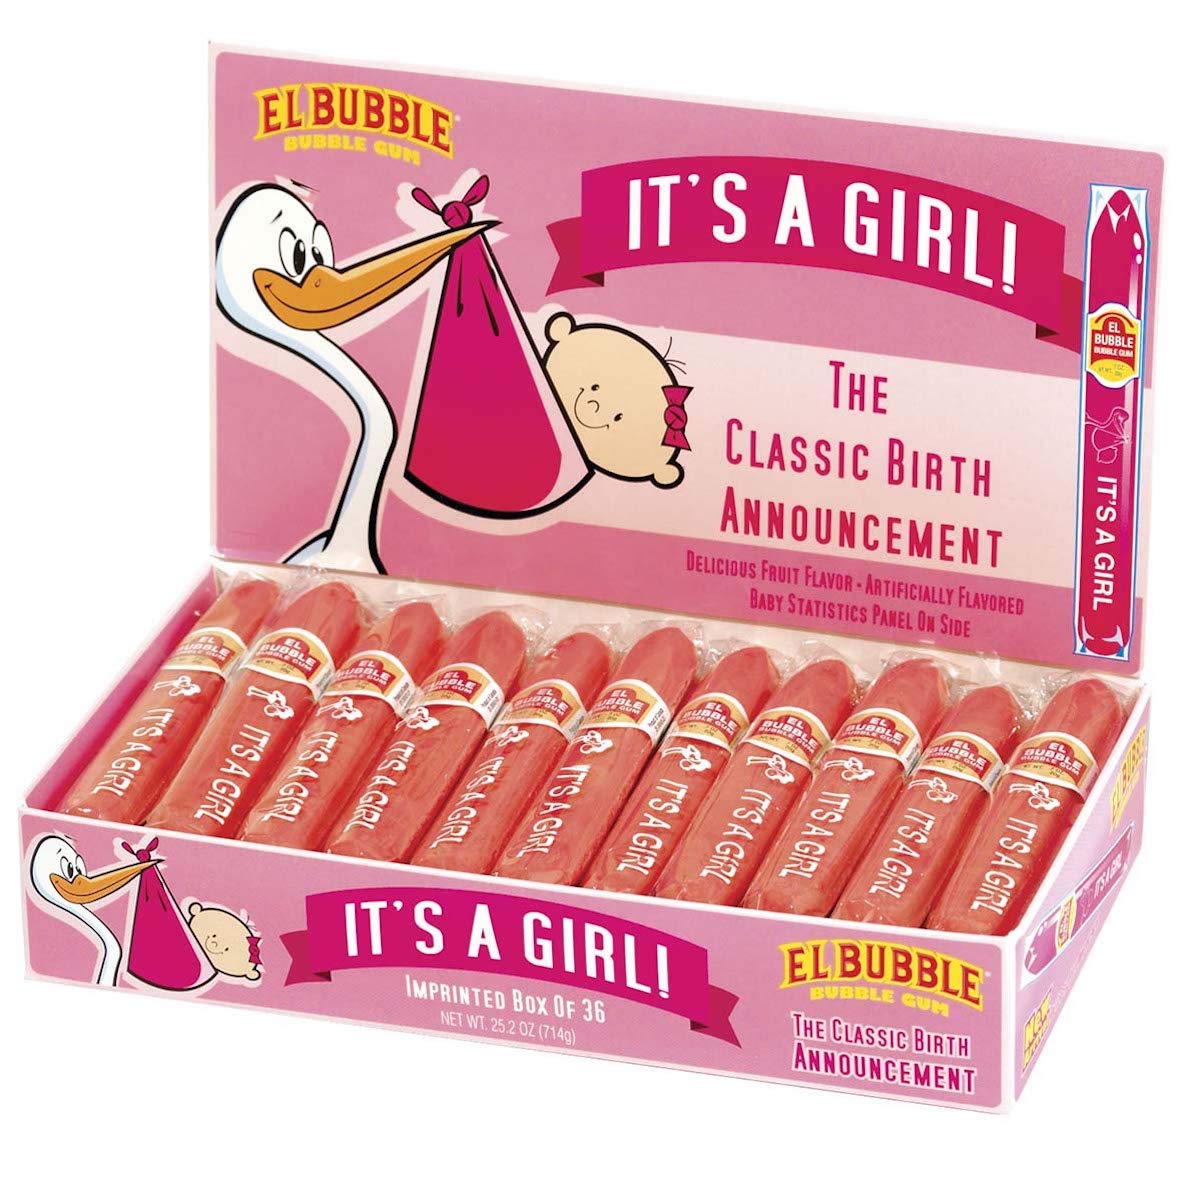 IT'S A GIRL CIGARS